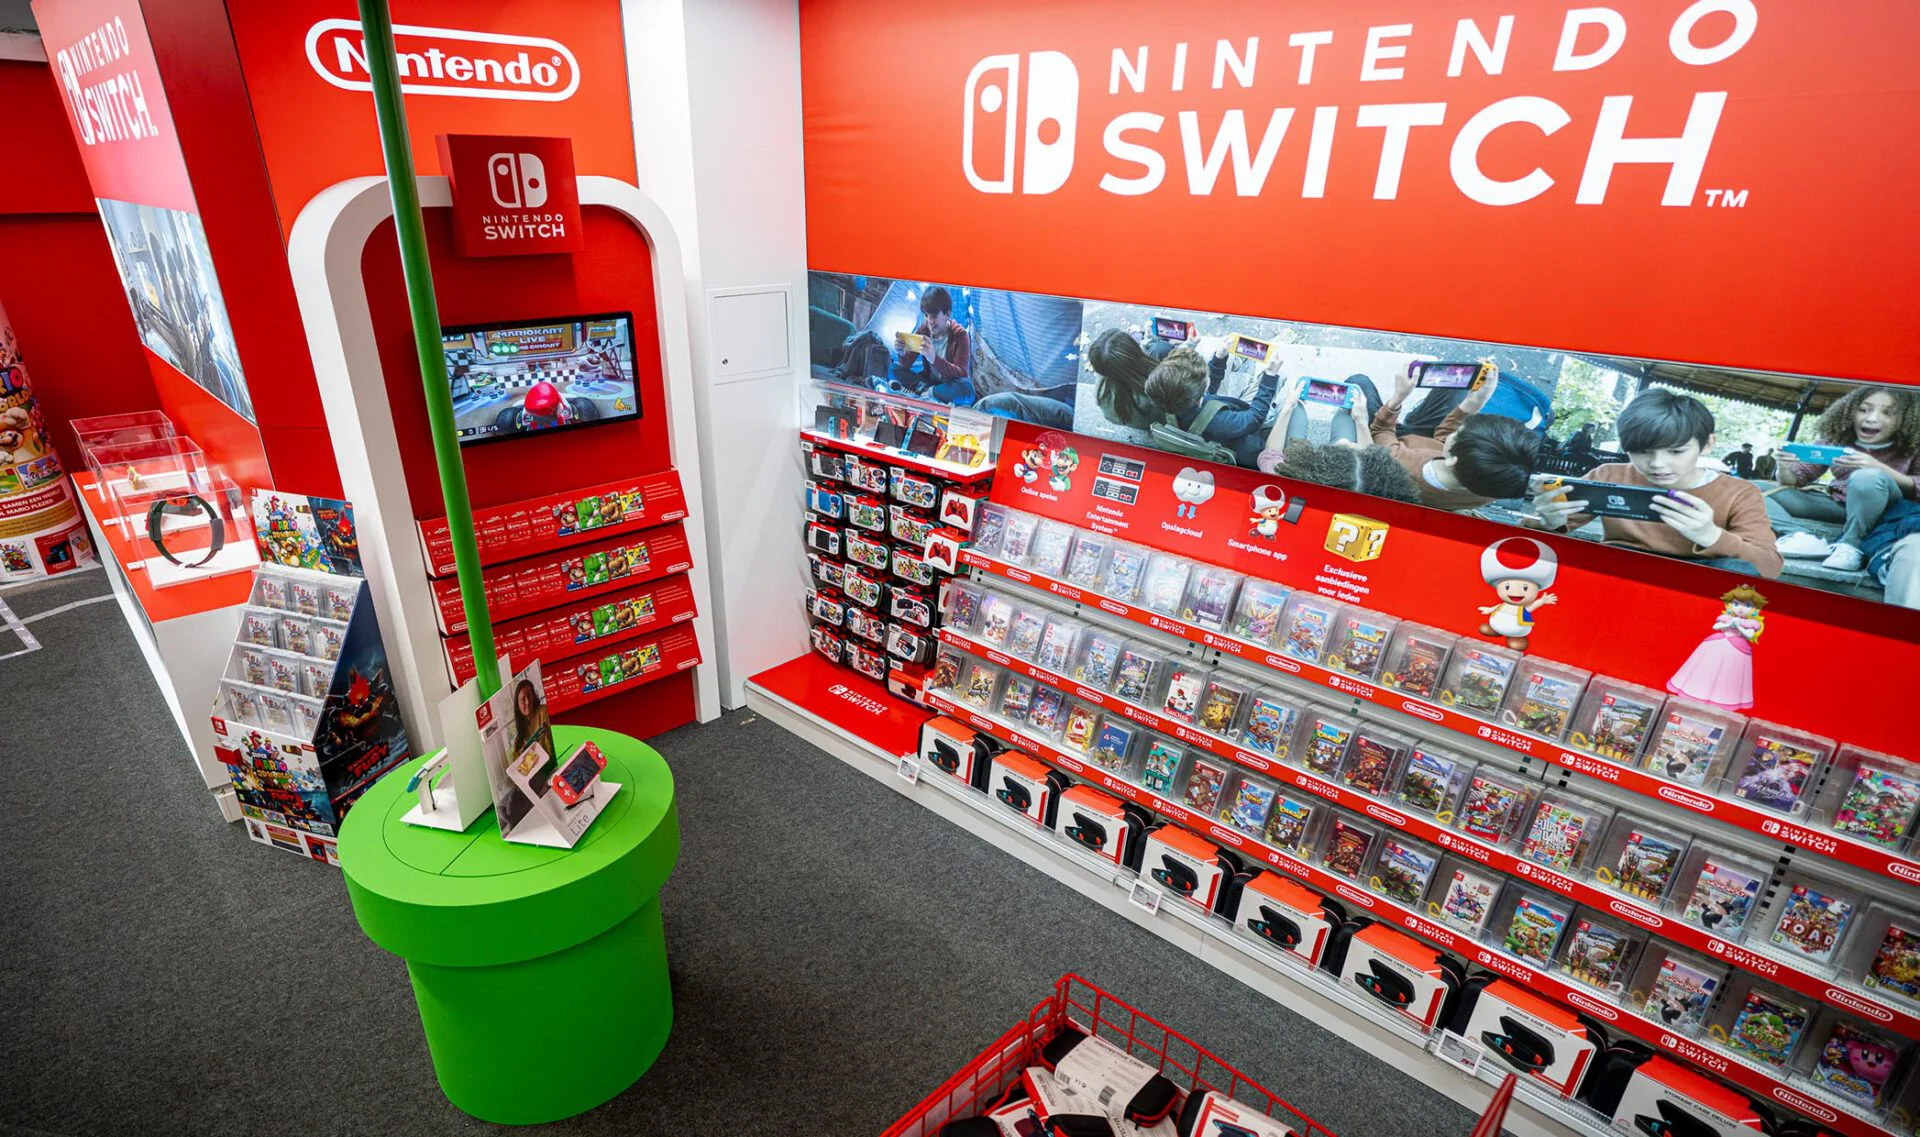 Nintendo Switch 2 Set to Defeat Scalpers through Enormous Initial Release Supply